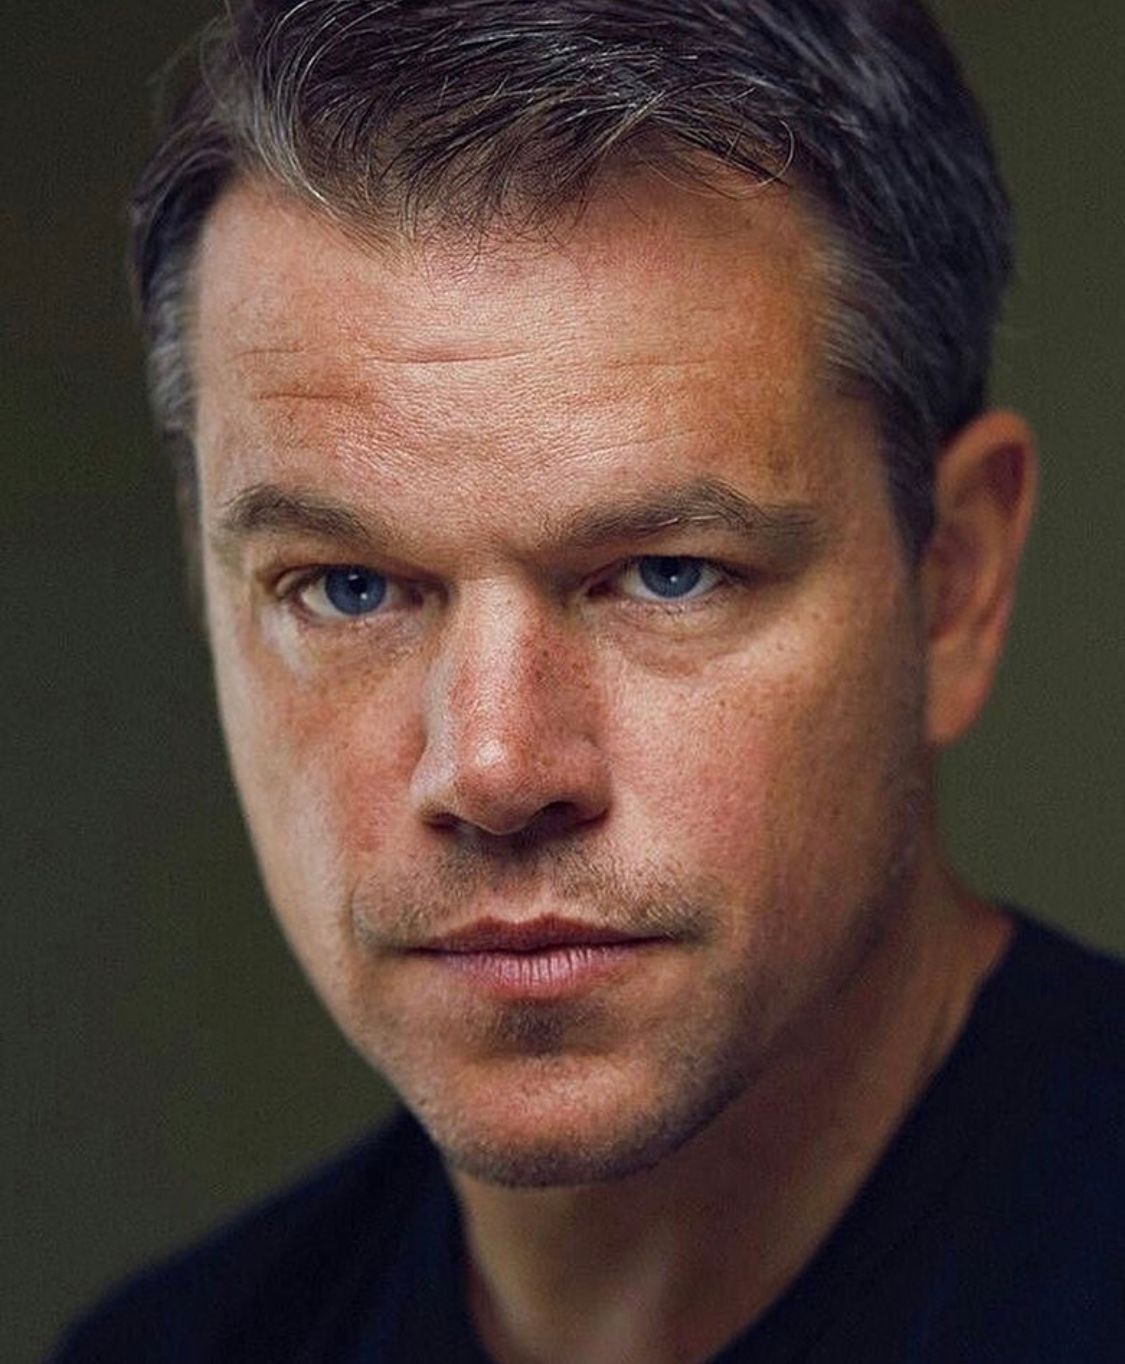 Matt Damon Opens Up On This Iconic Role He Had To Shed 50 Pounds Of